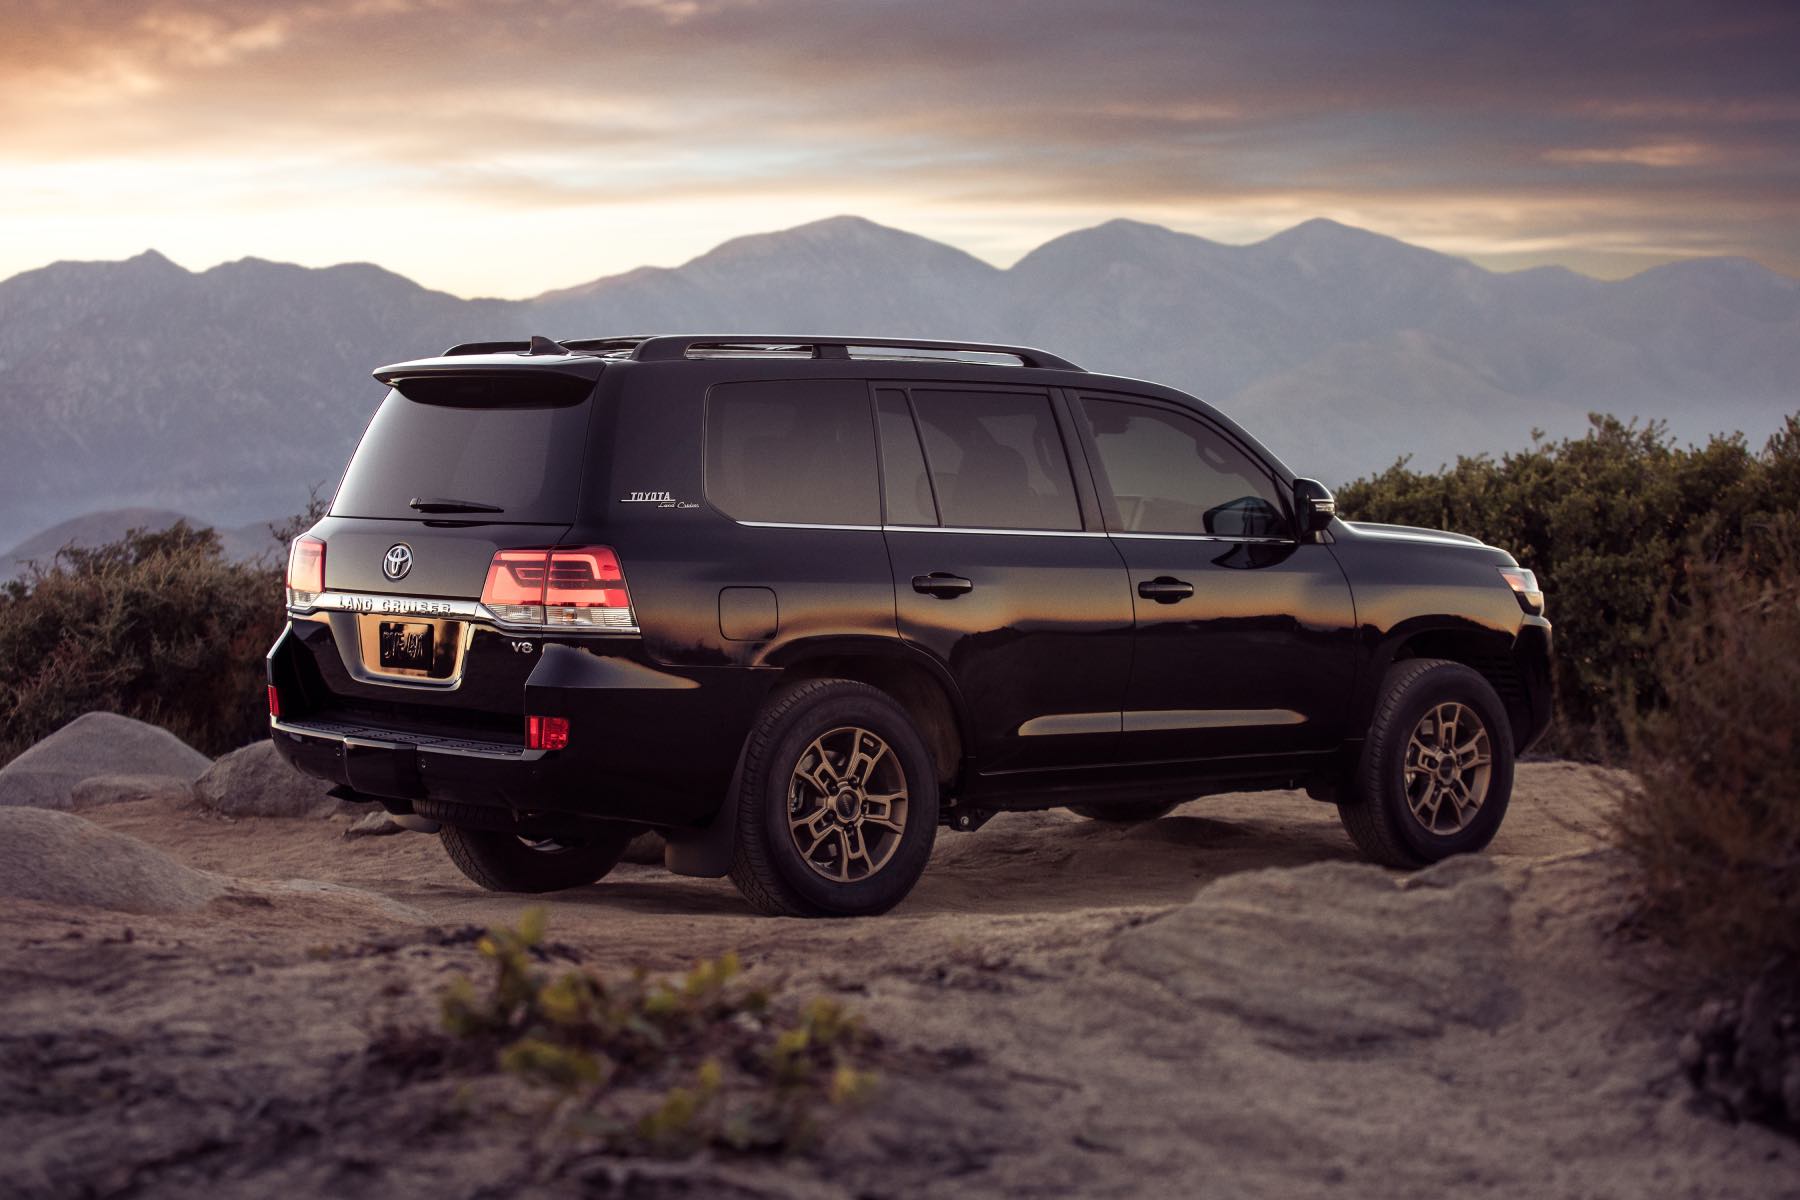 The 2021 Toyota Land Cruiser, the last model sold in the U.S., with mountains in the background.